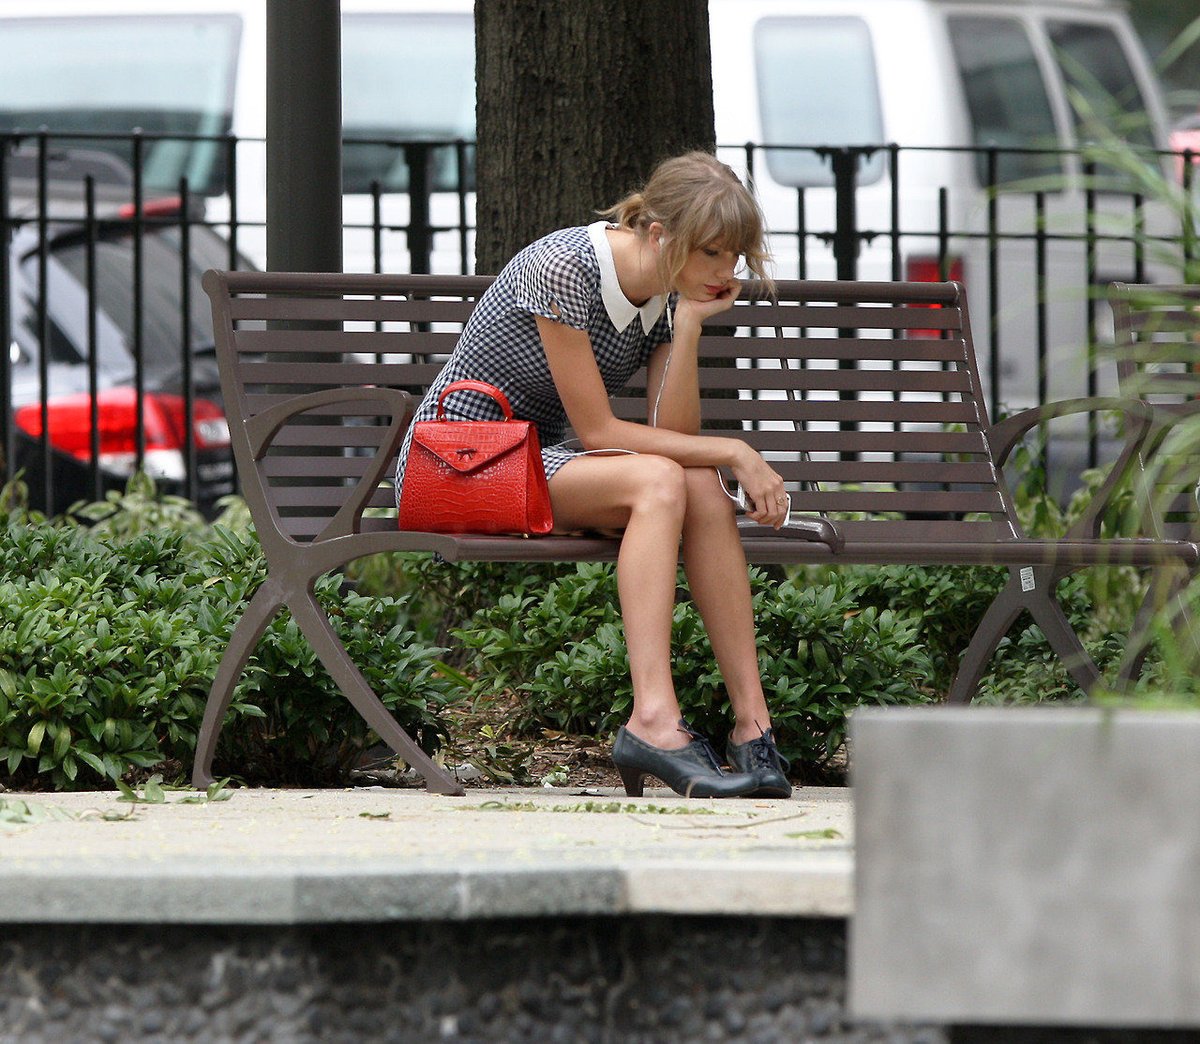 Me staring at the Taylor Swift pre-sale queue listening to Wildest Dreams like: